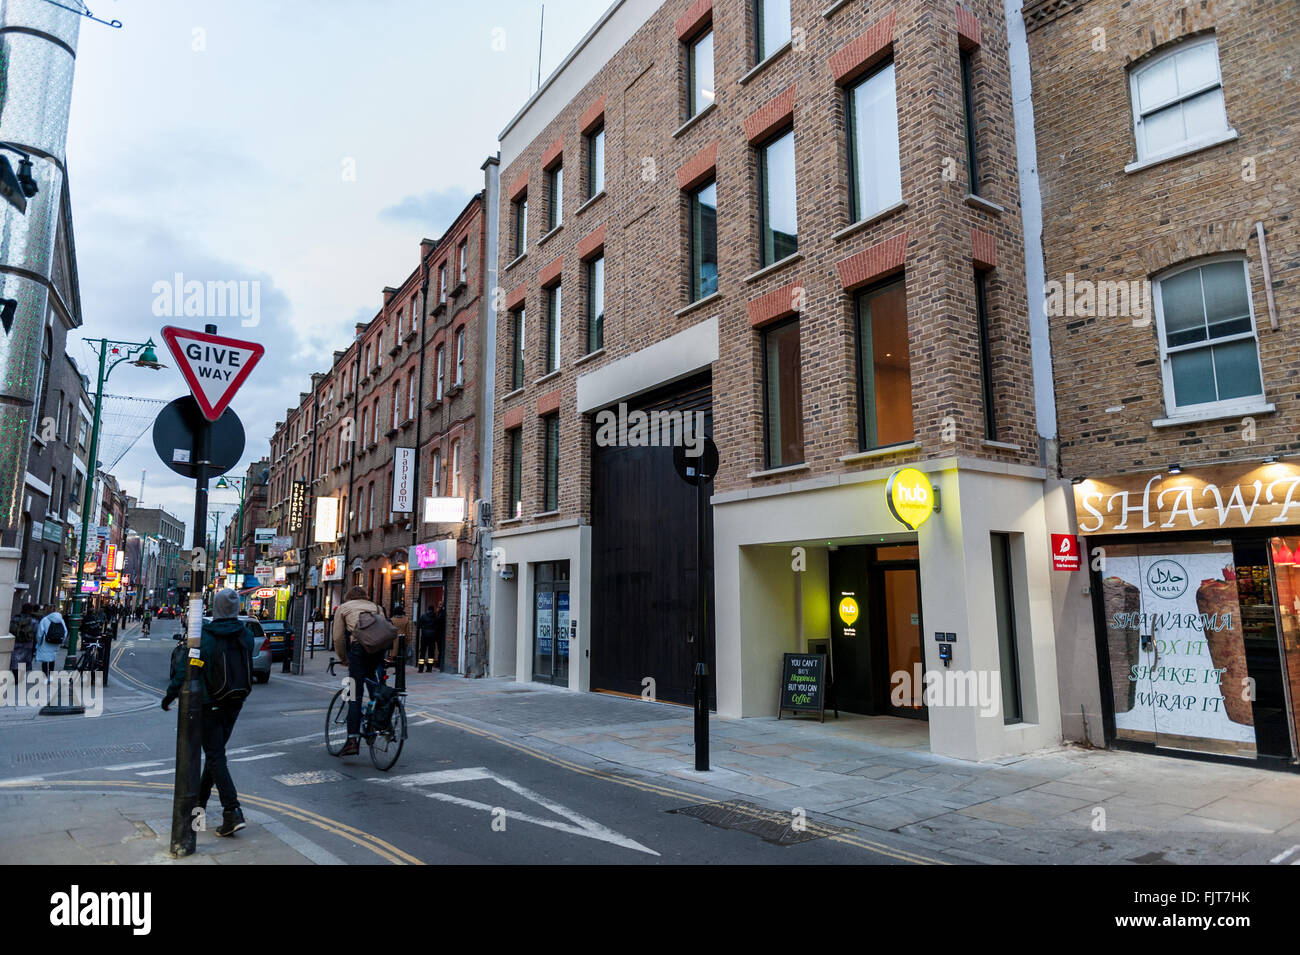 London, UK. 3 March 2016. A new hotel, "hub" by Premier Inn, opens on Brick  Lane. The 189-room budget hotel stands opposite the Jamme Masjid mosque and  on the site of the